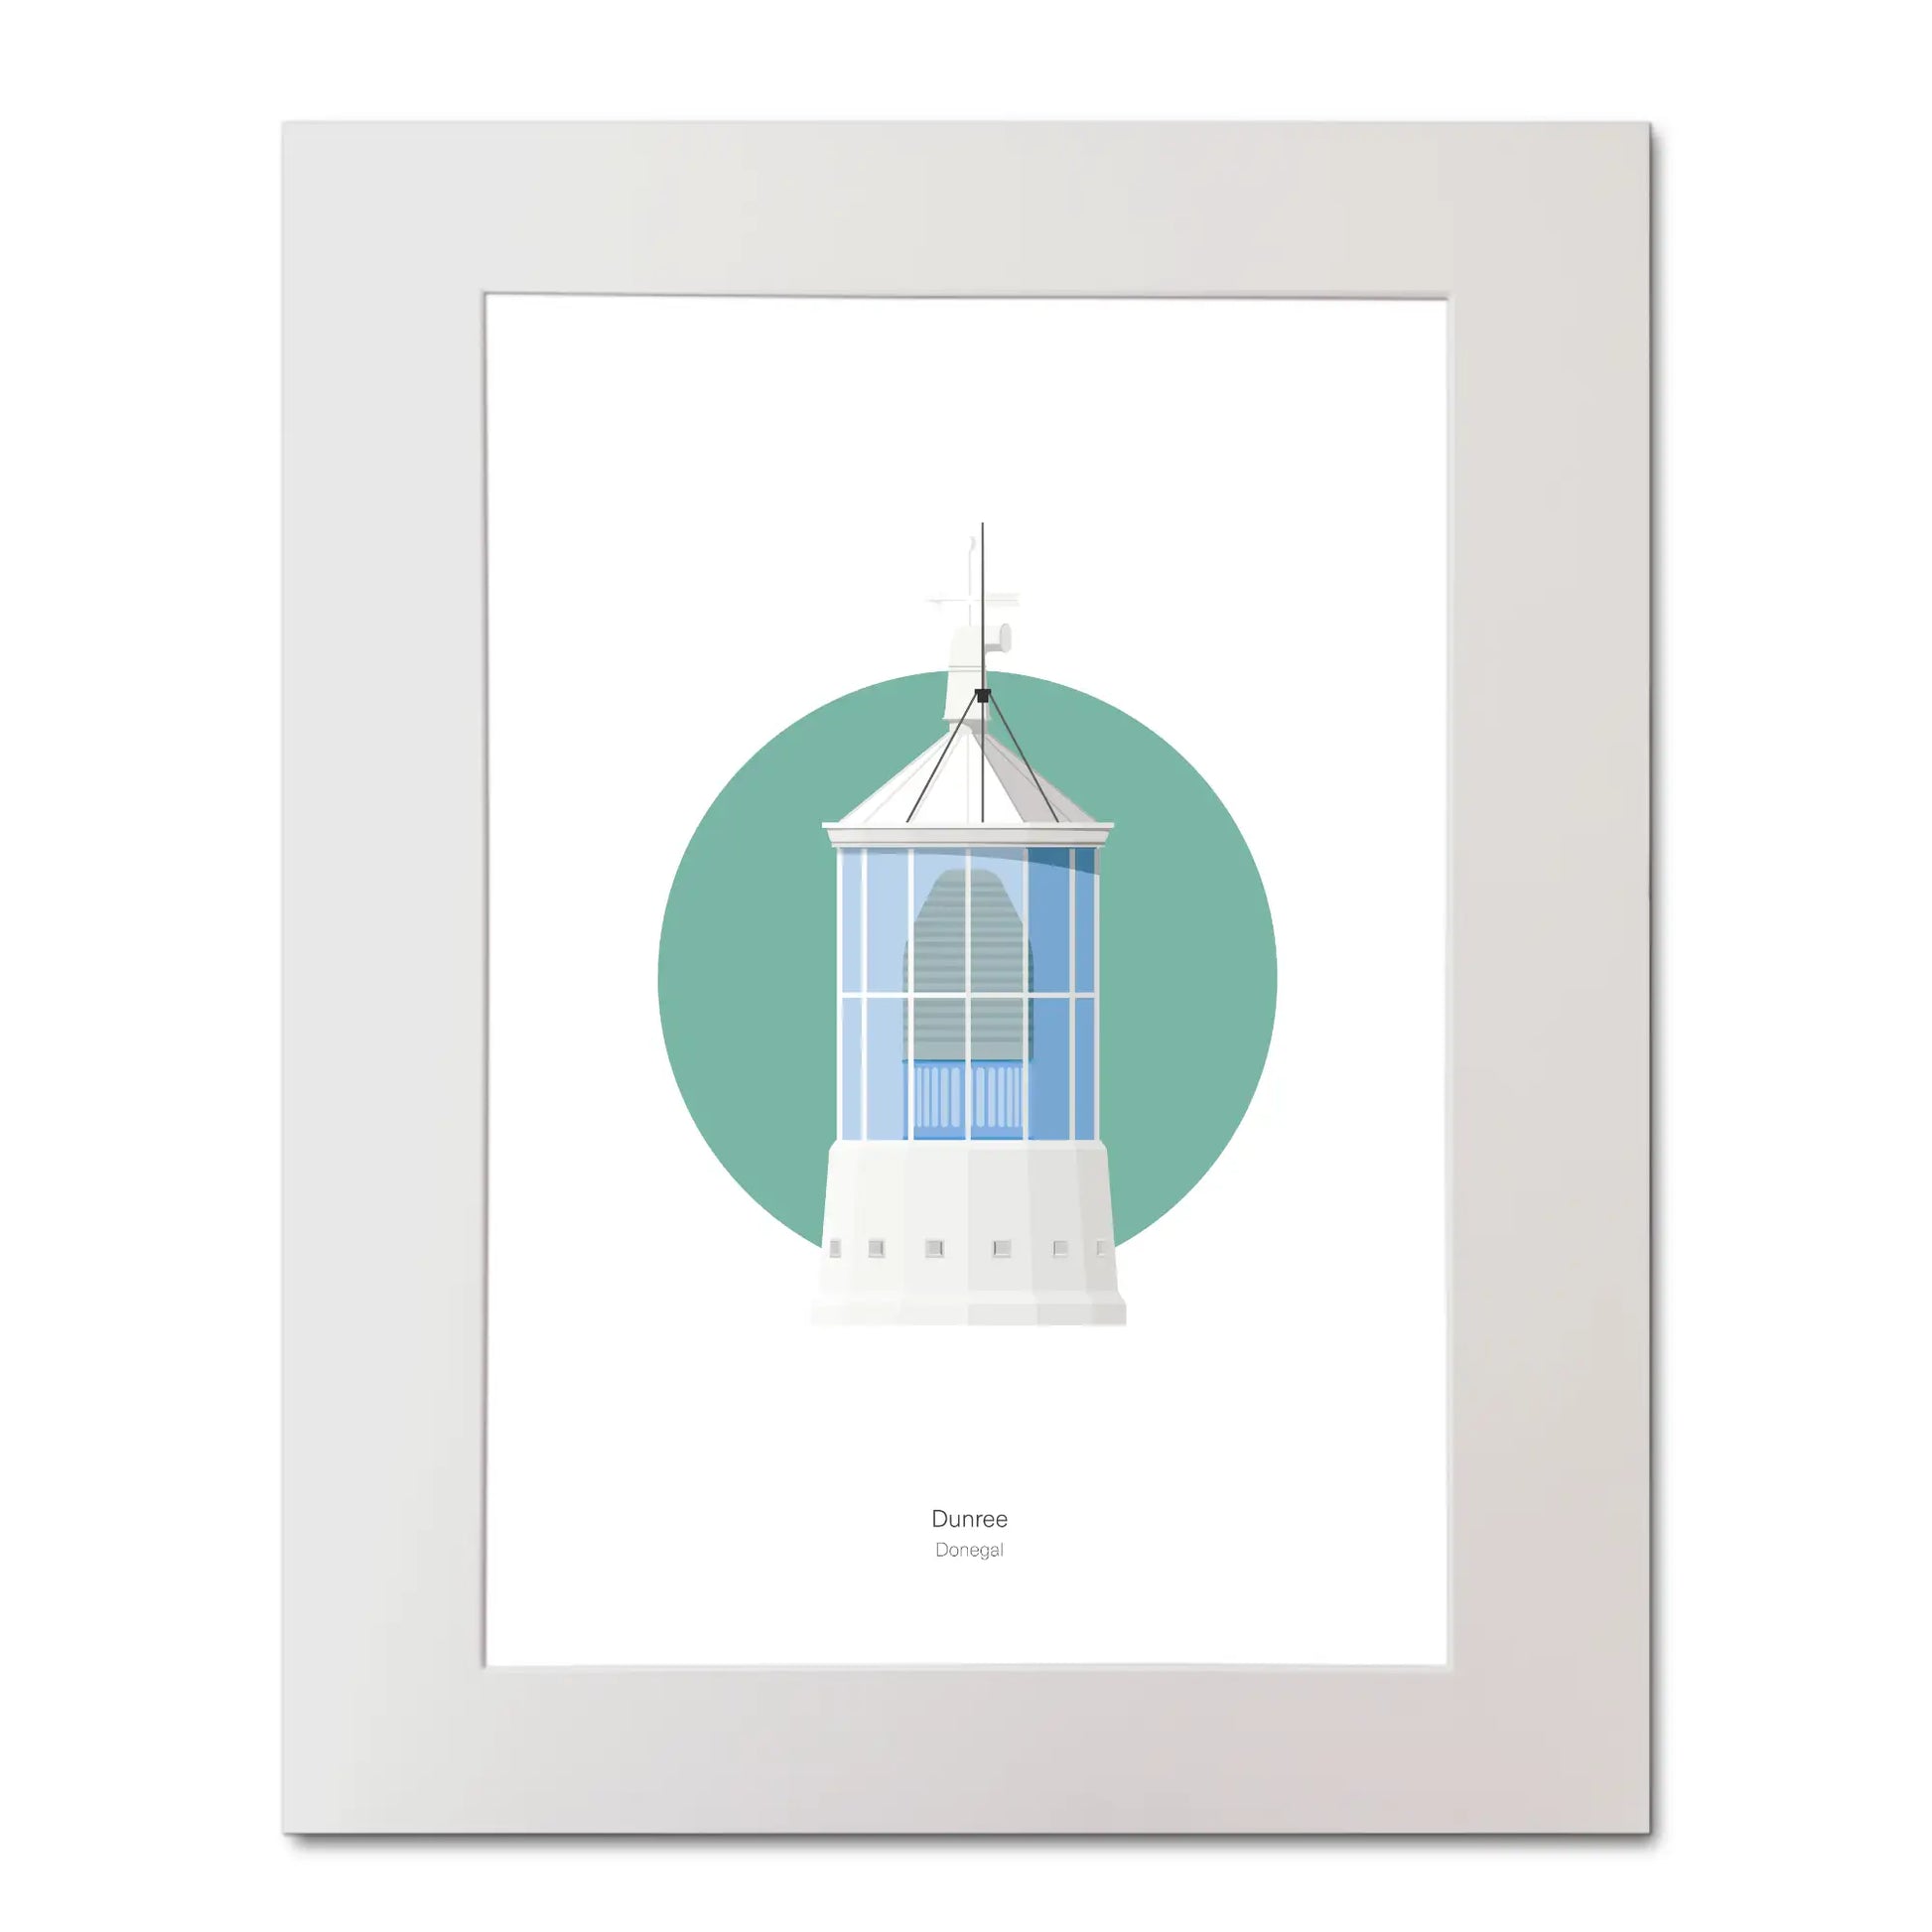 Contemporary illustration of Dunree lighthouse on a white background inside light blue square, mounted and measuring 40x50cm.